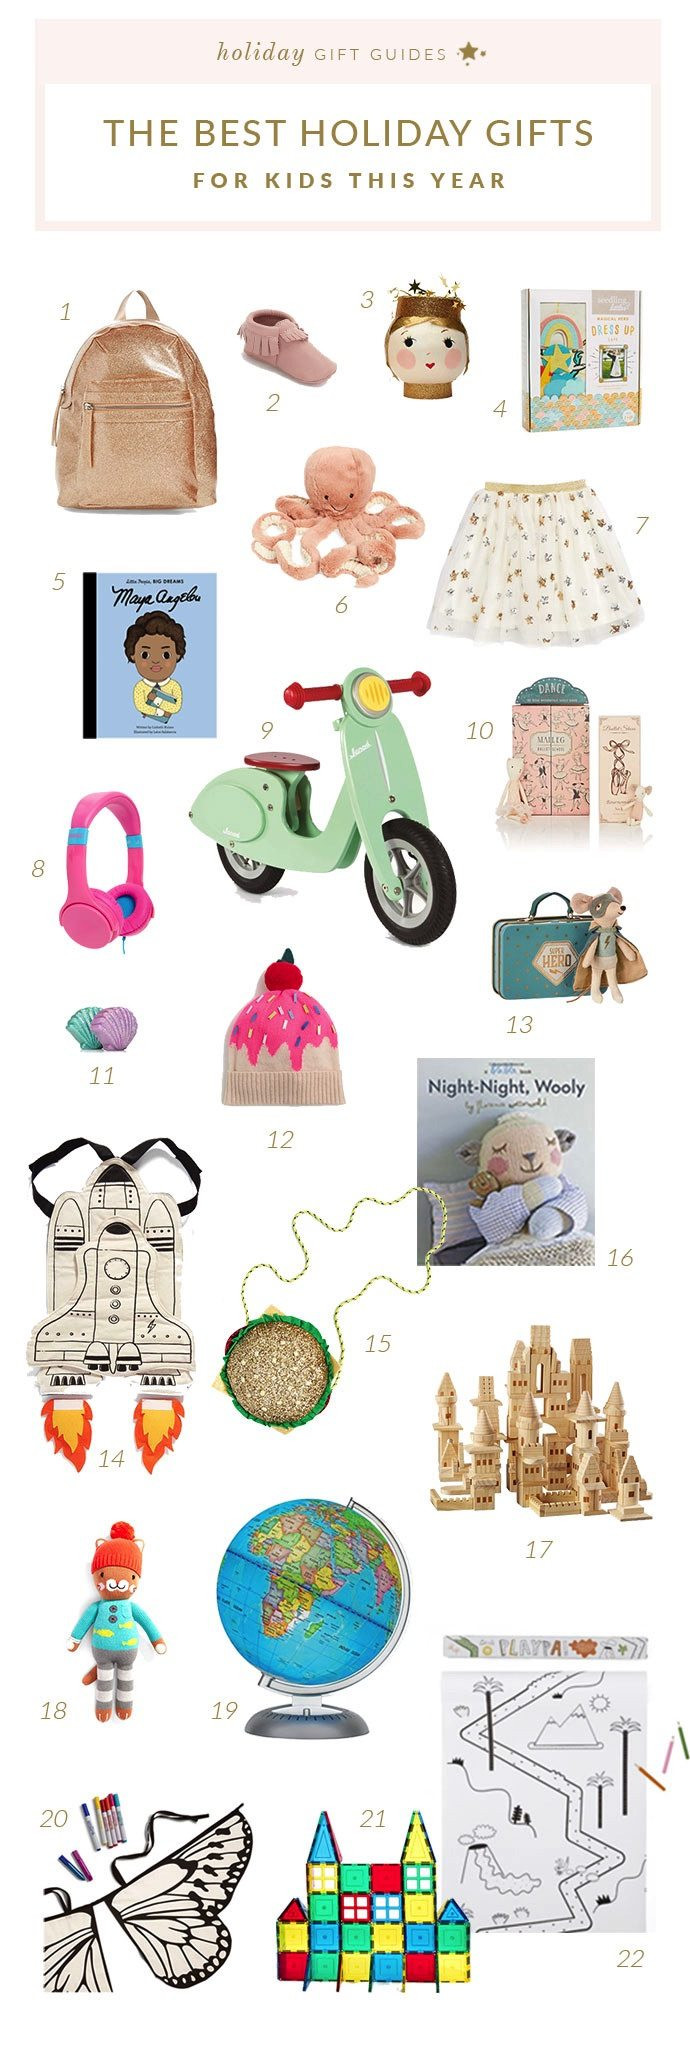 Holiday Gift Guides For Kids
 The Best Holiday Gifts For Kids This Year